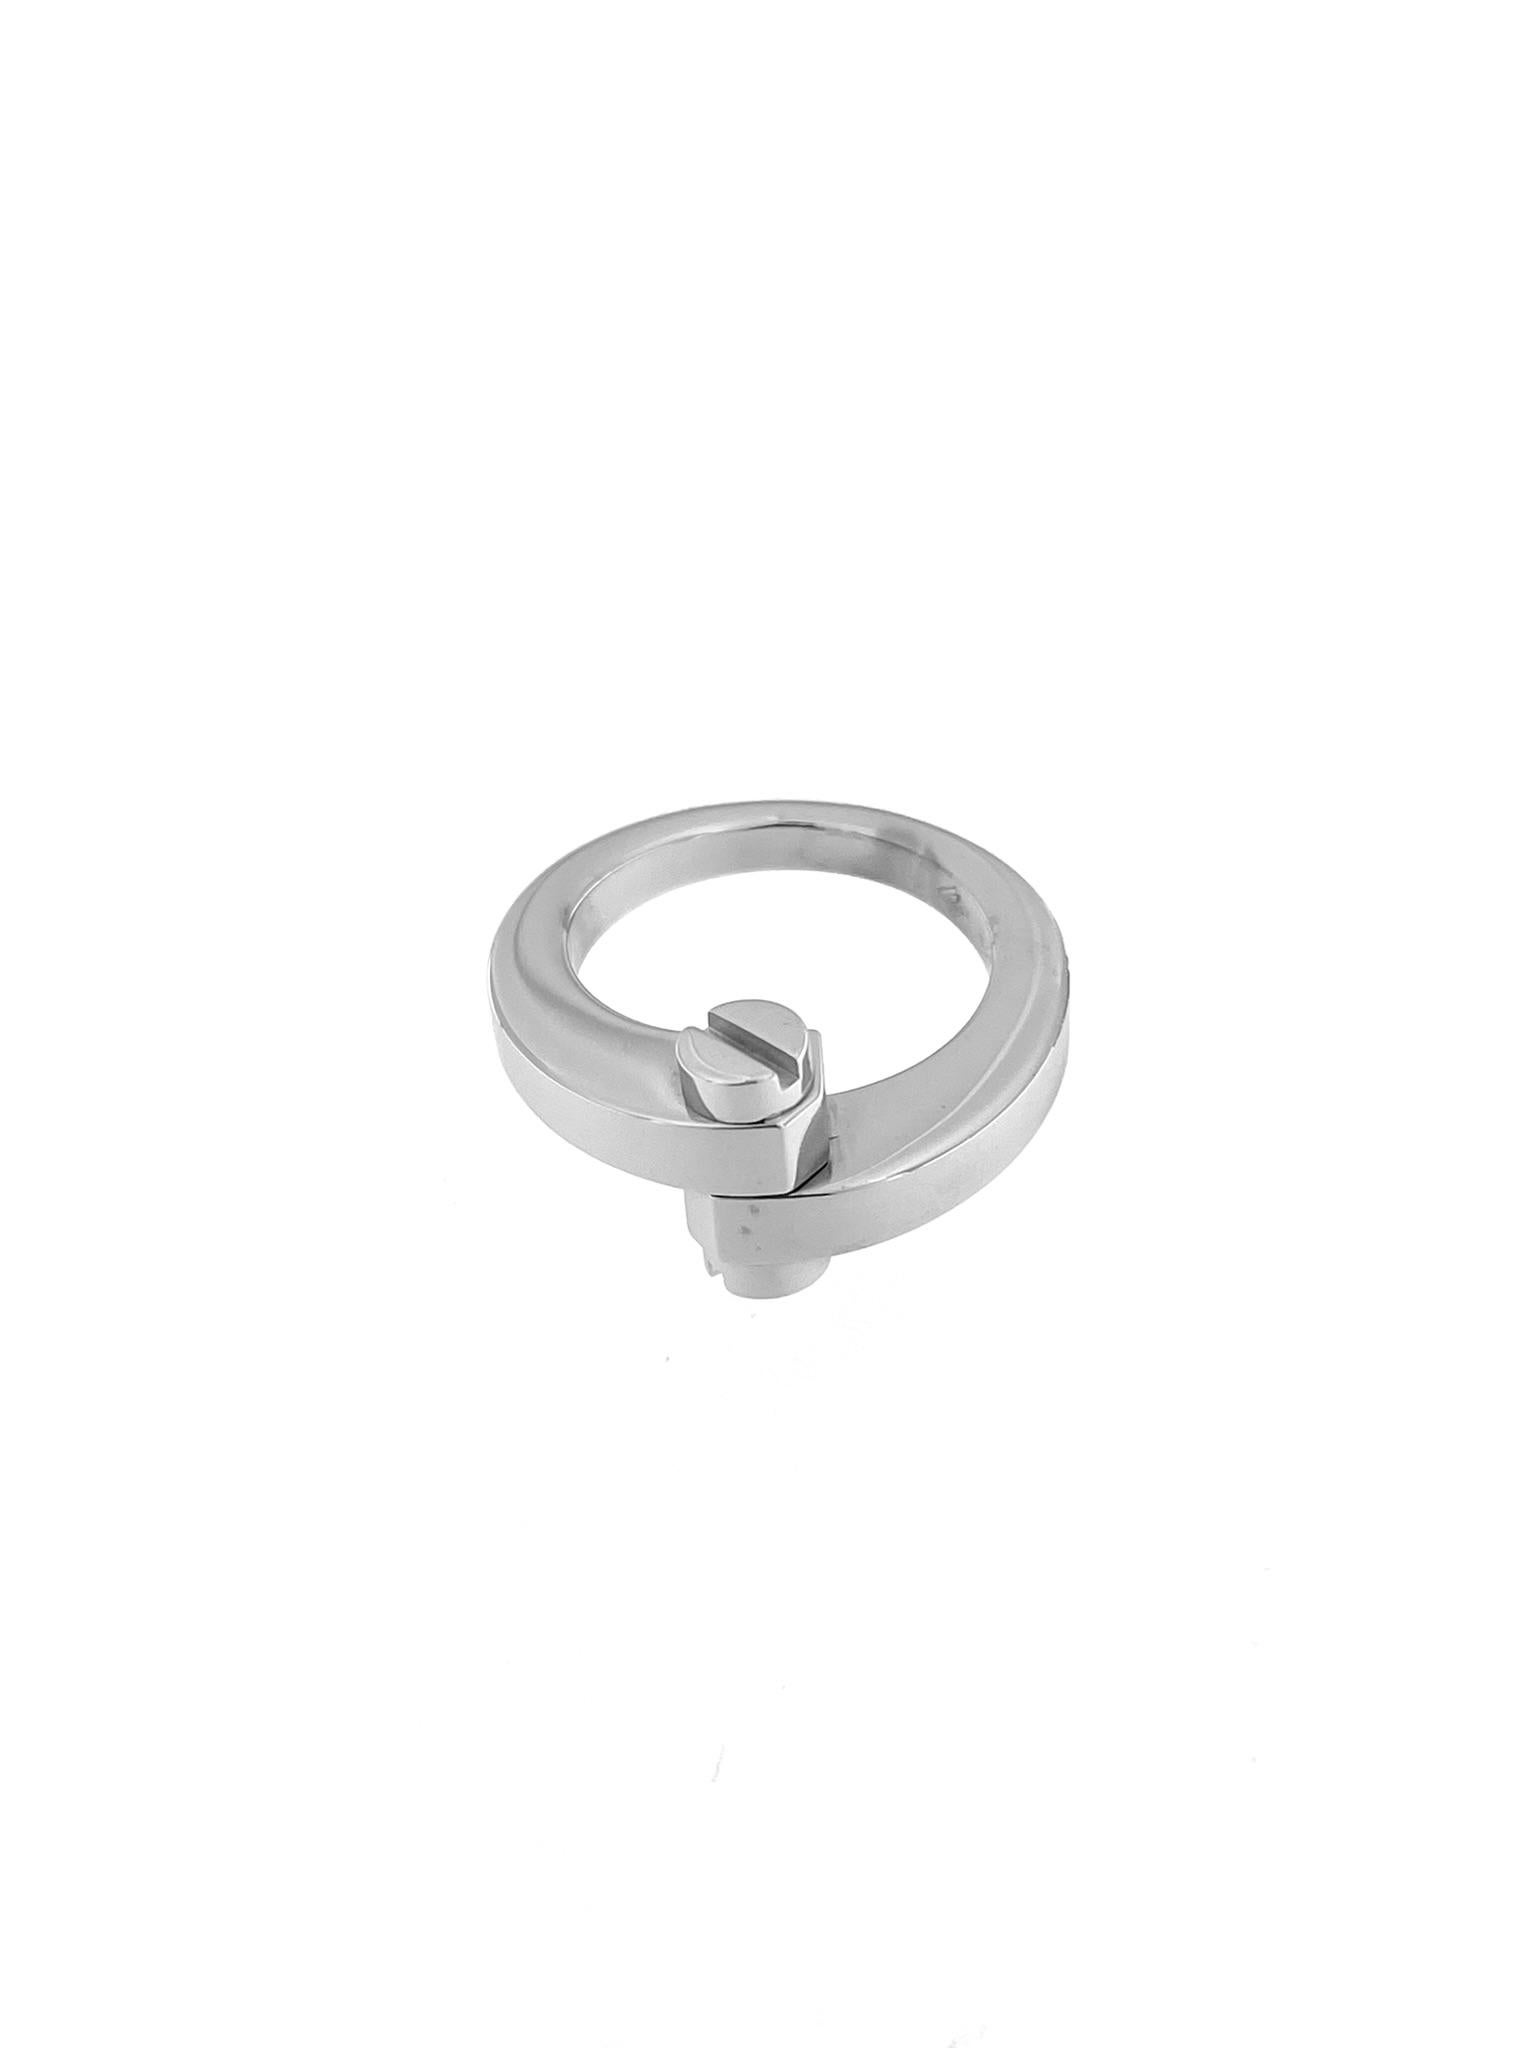 The Cartier Menotte Ring in 18-karat white gold is a refined and elegant piece of jewelry designed for sophistication and style by the renowned French luxury brand, Cartier. The Menotte collection is characterized by its distinctive handcuff motif,